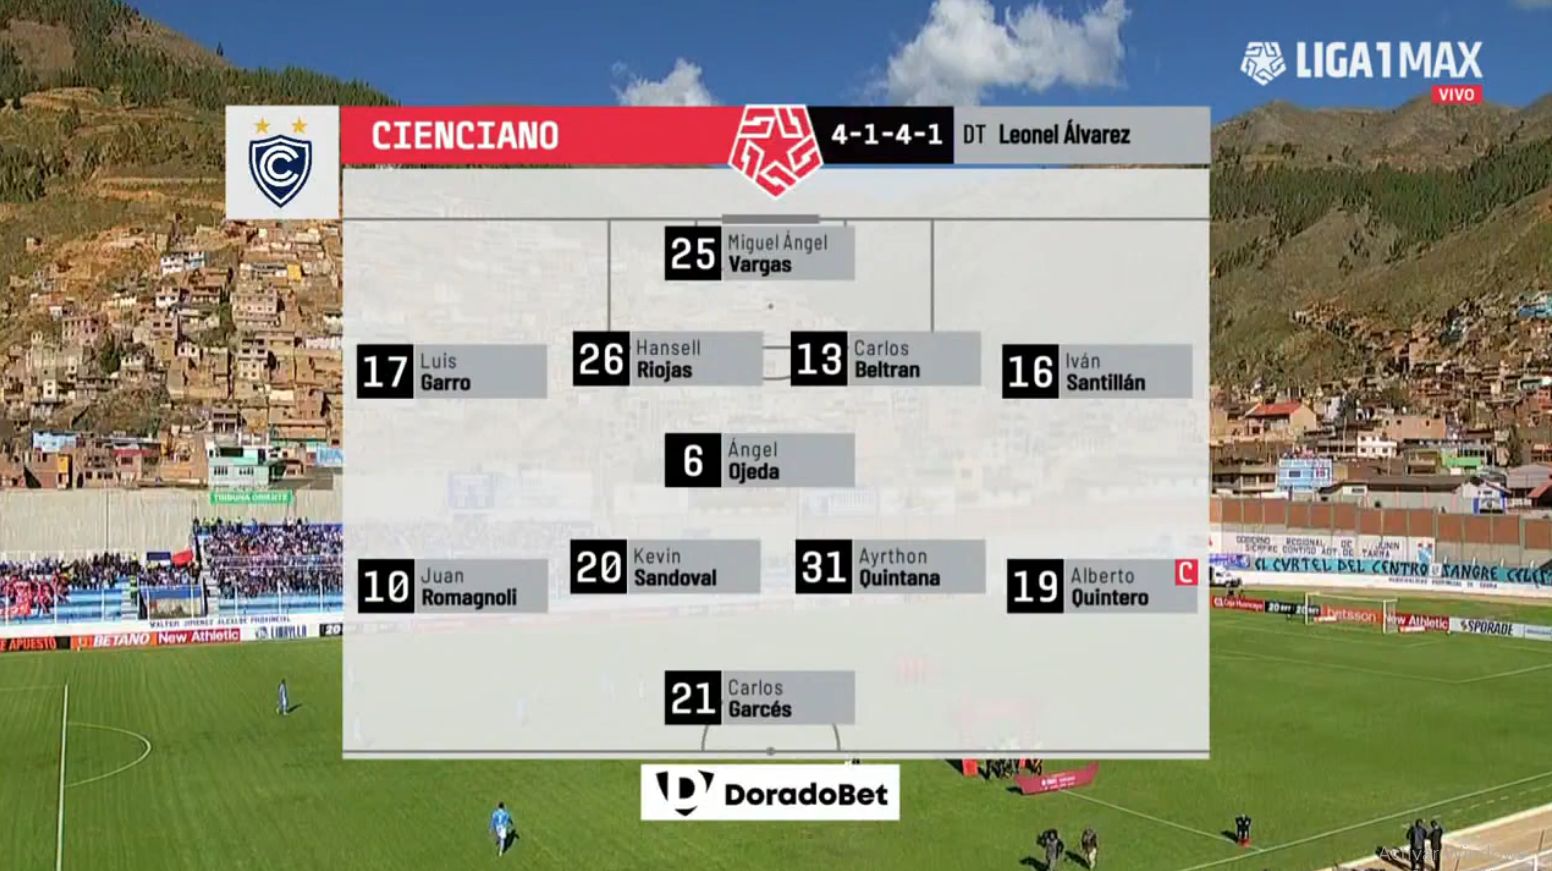 Cienciano's eleven against ADT for League 1.